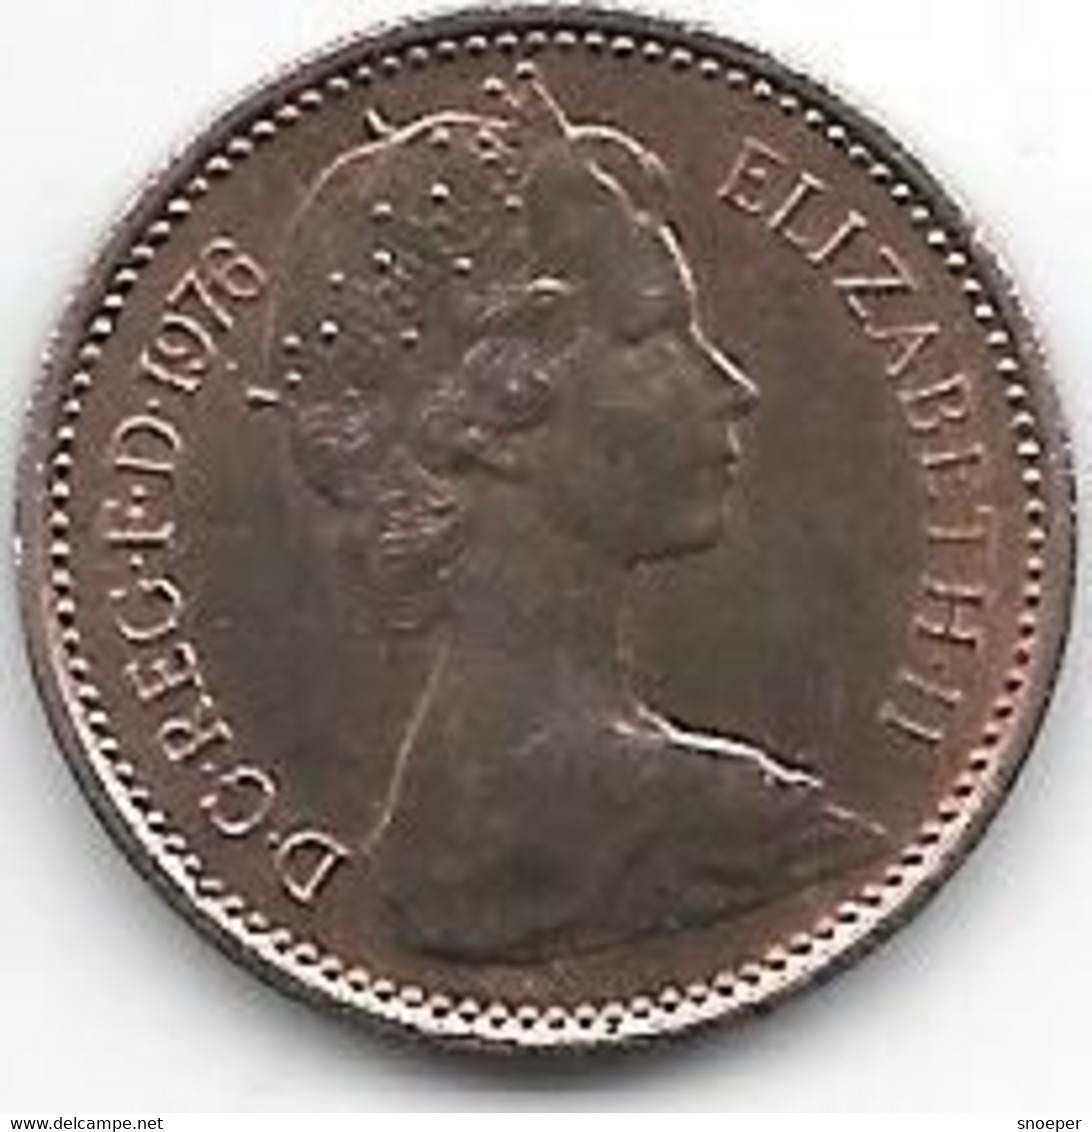 Great Britain 1/2 Penny 1976  Km 914  Unc/ms63 - 1/2 Penny & 1/2 New Penny